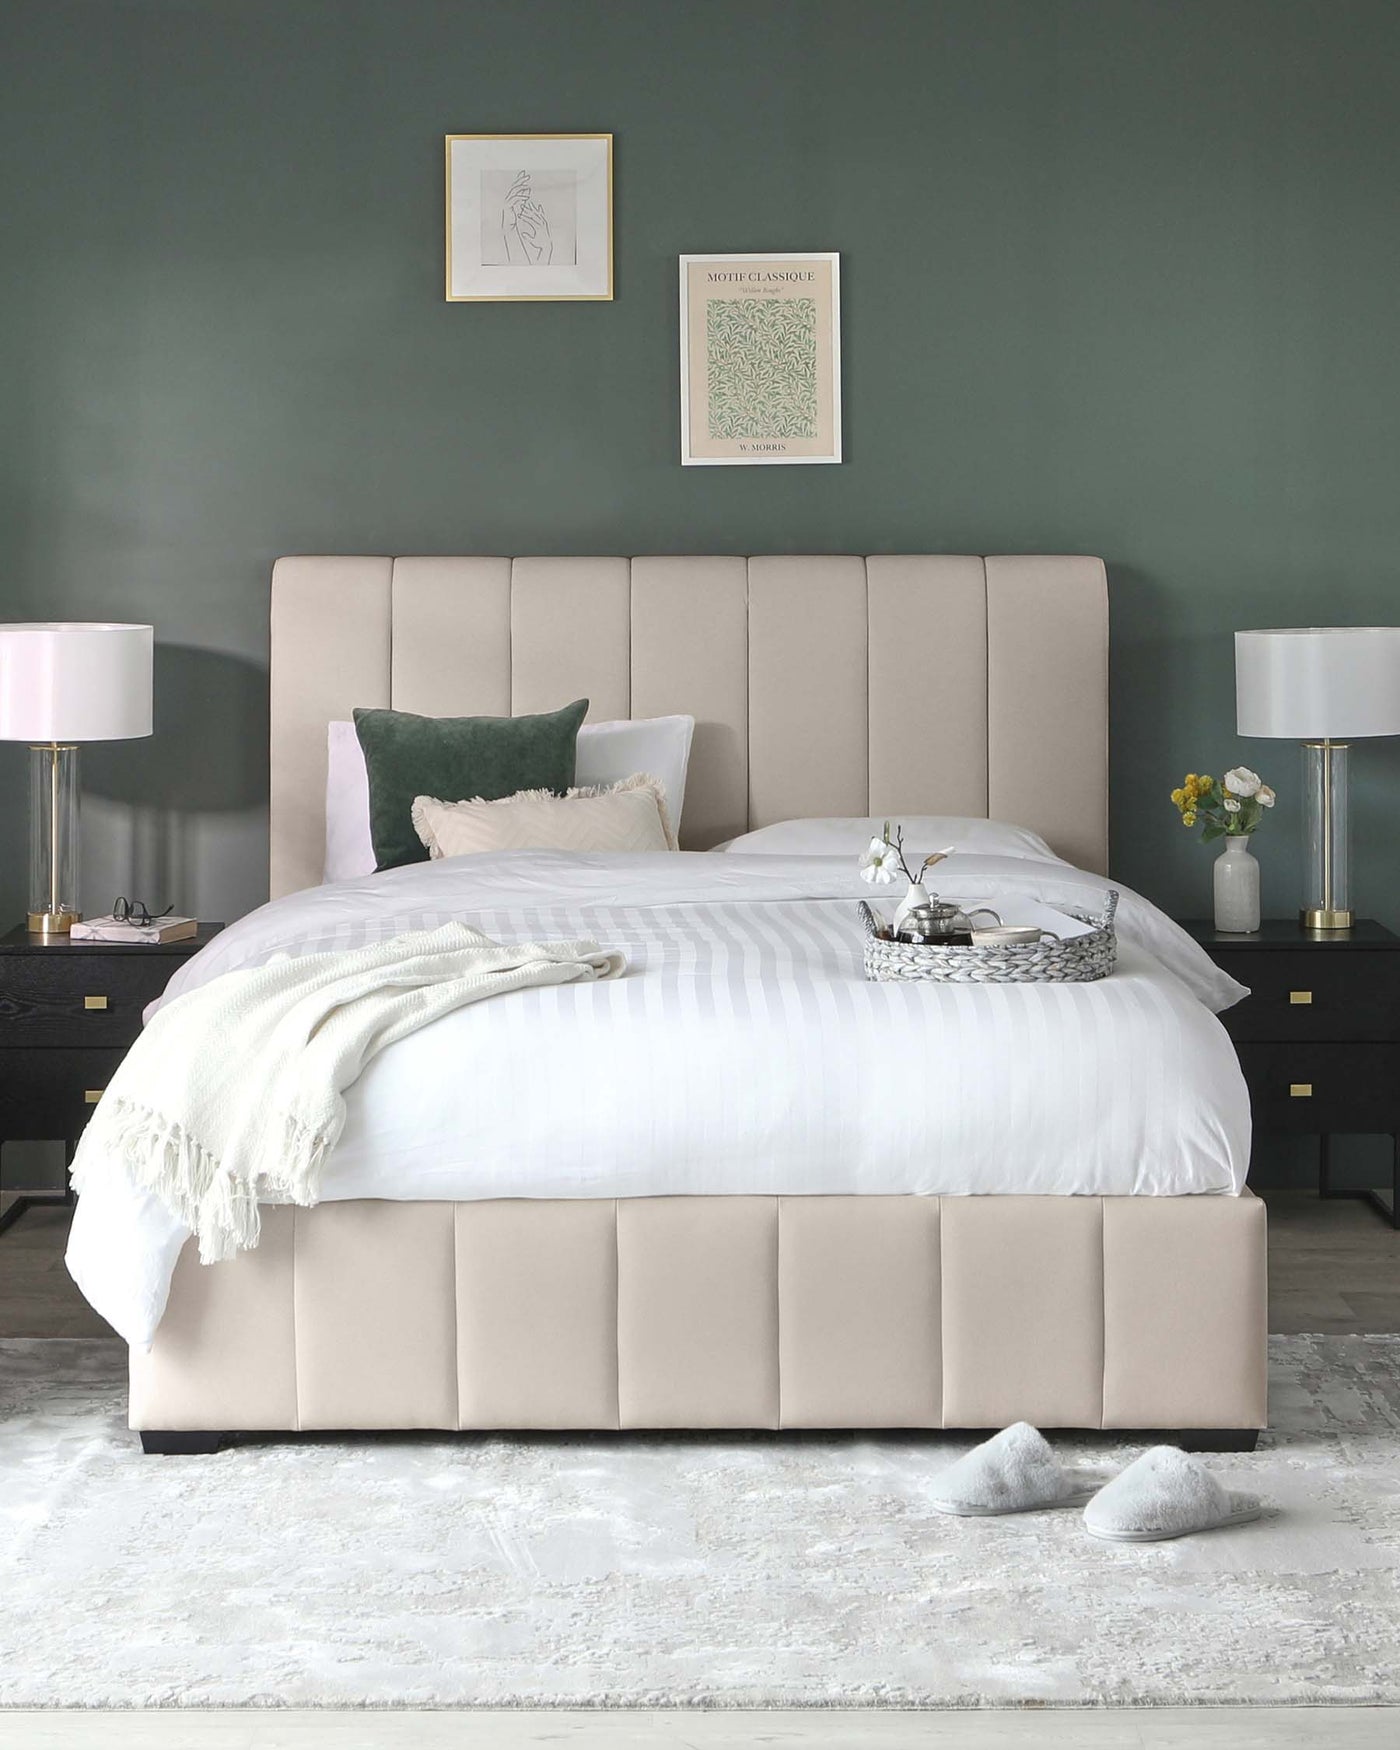 Elegant bedroom furniture setup including a large contemporary upholstered bed with a tufted headboard in a blush tone, flanked by two dark wood nightstands with gold accents, and complemented by matching modern table lamps with white shades and a clear base. The bed is dressed with crisp white strip